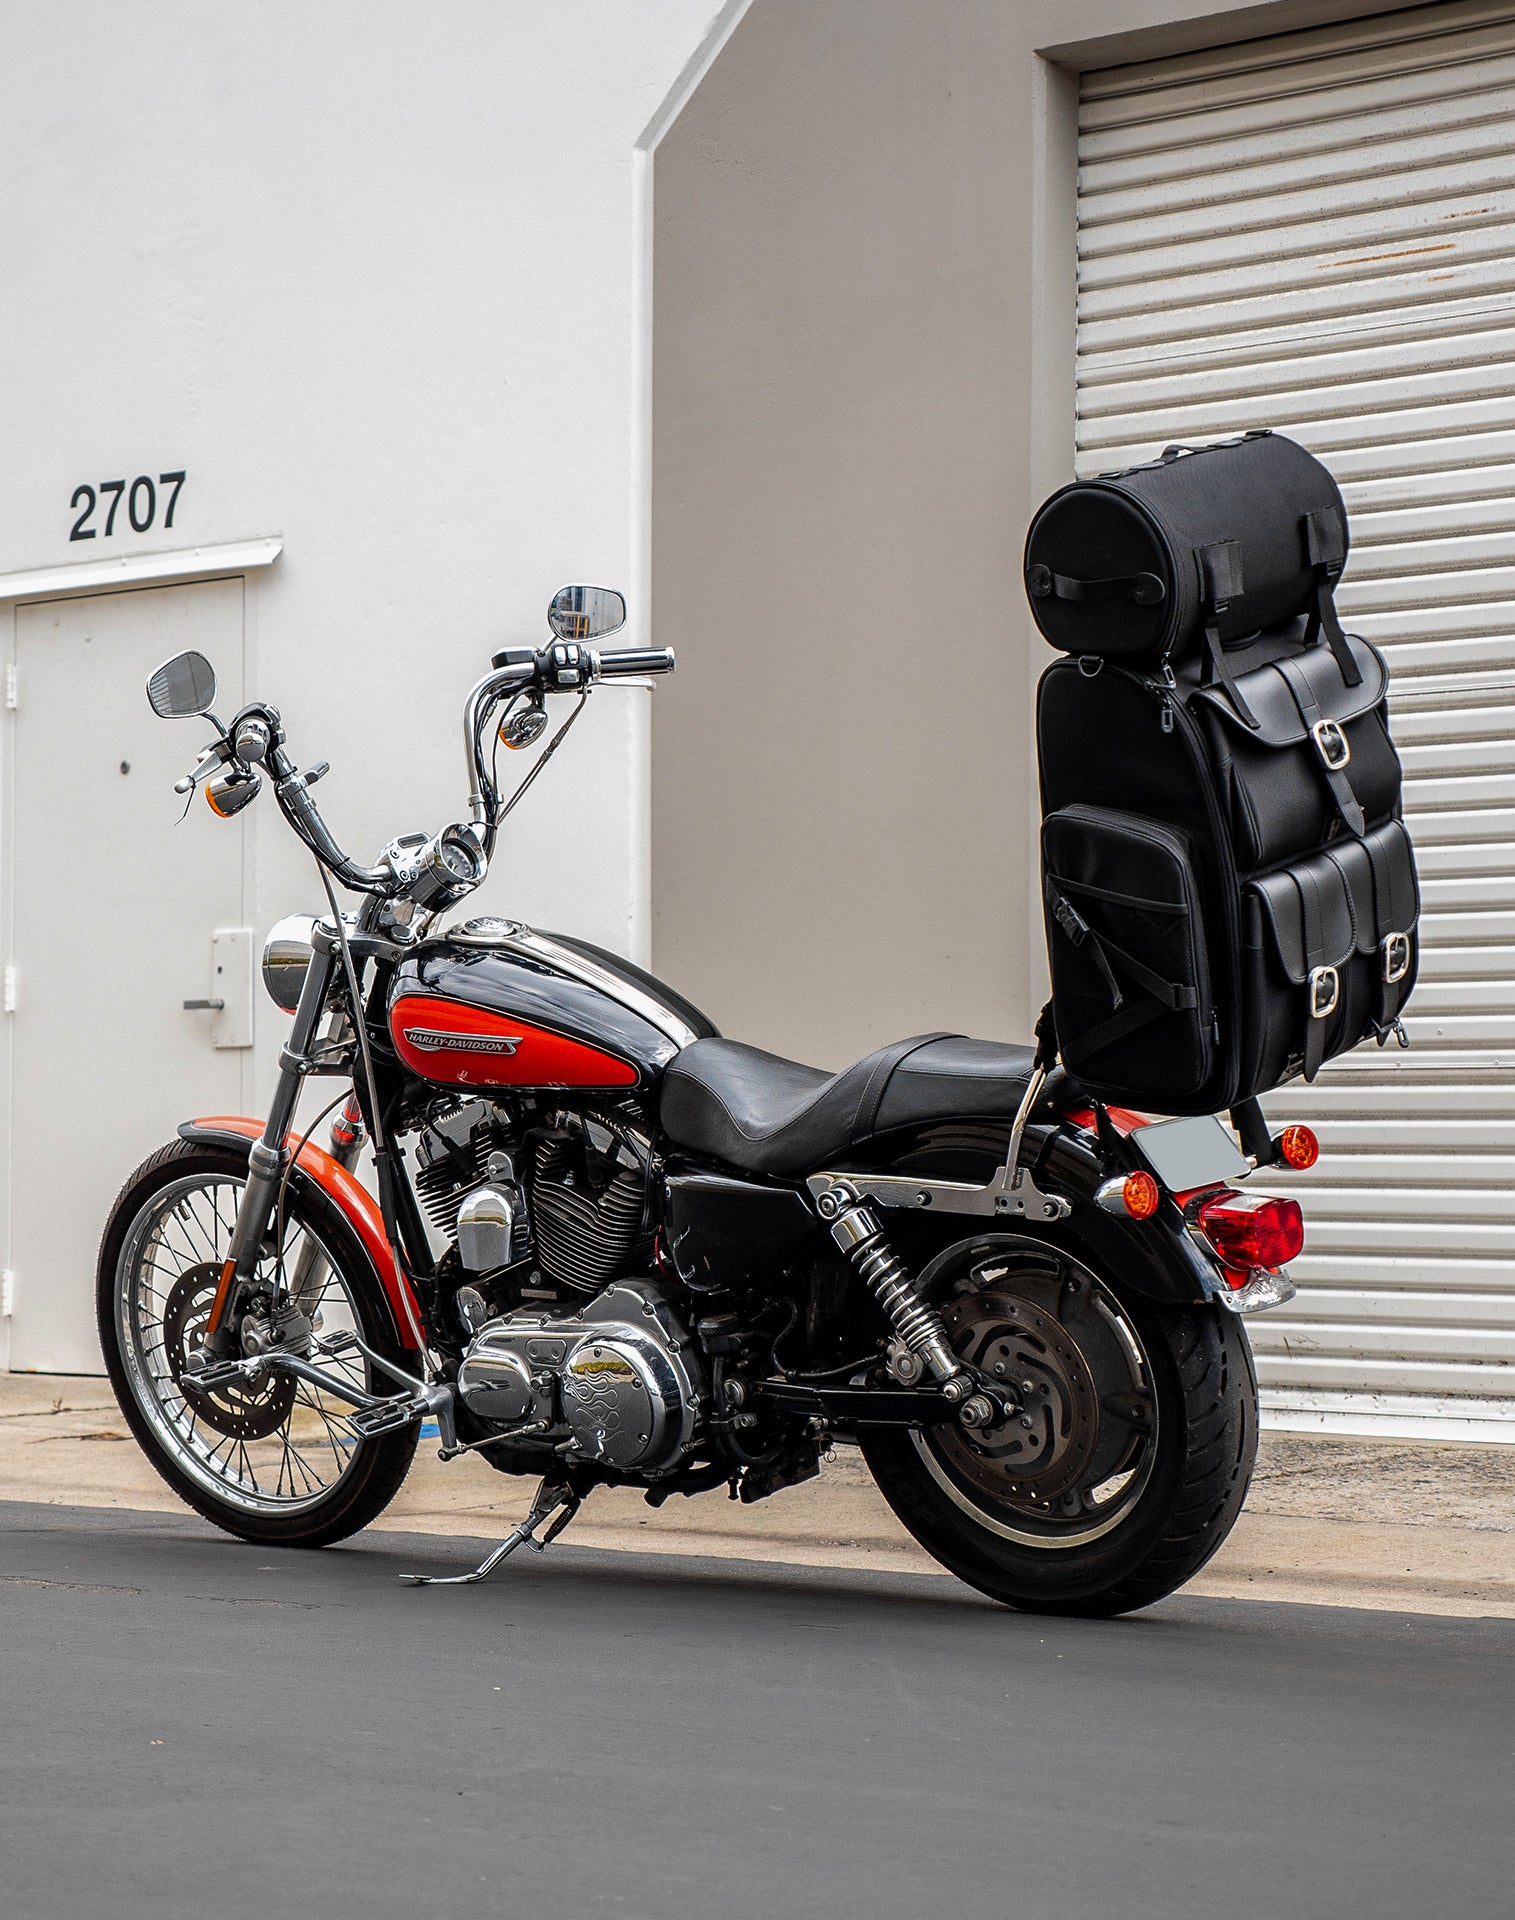 55L - Highway Extra Large Plain Victory Motorcycle Tail Bag